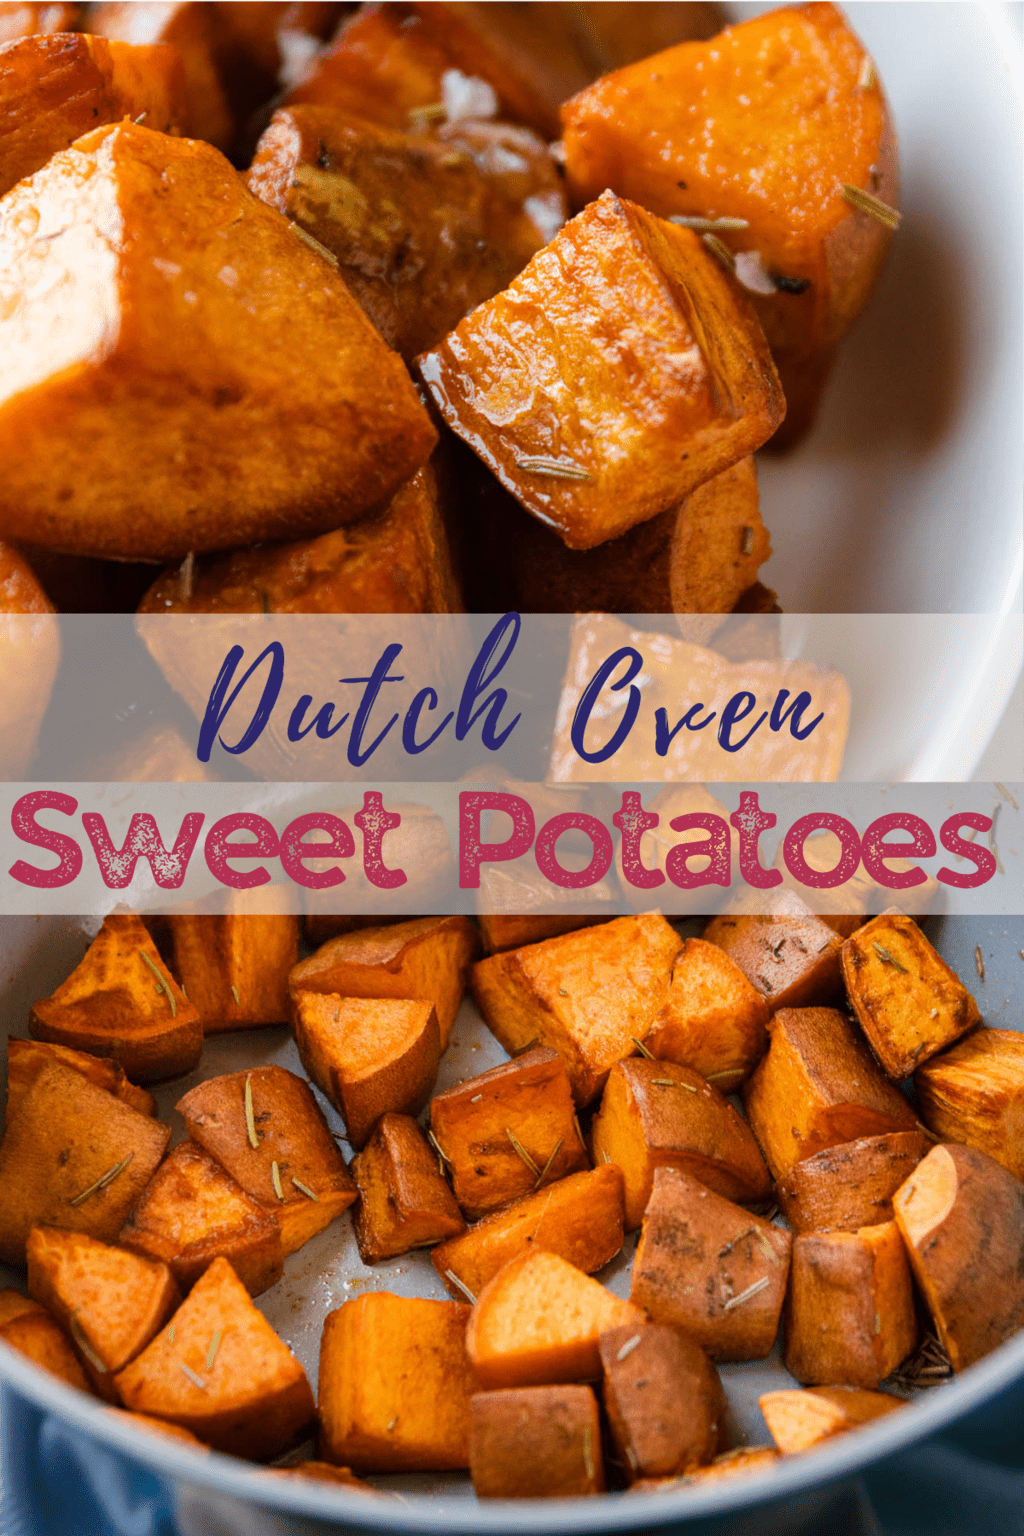 A pinterest pin for Dutch oven sweet potatoes with two up-close shots of the potatoes.